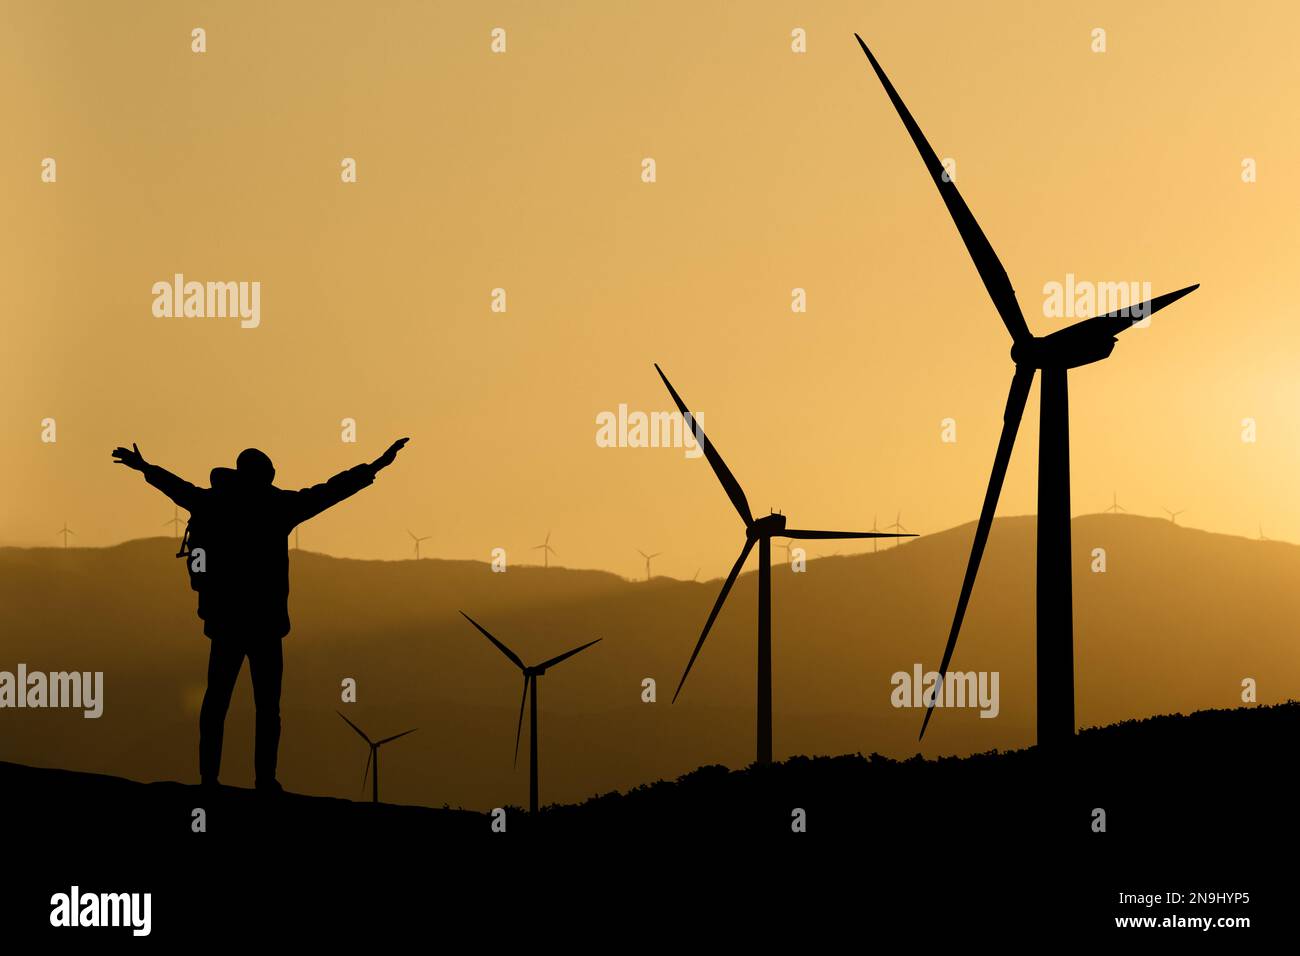 Silhouettes of a traveler with a backpack and wind turbines at sunset Stock Photo